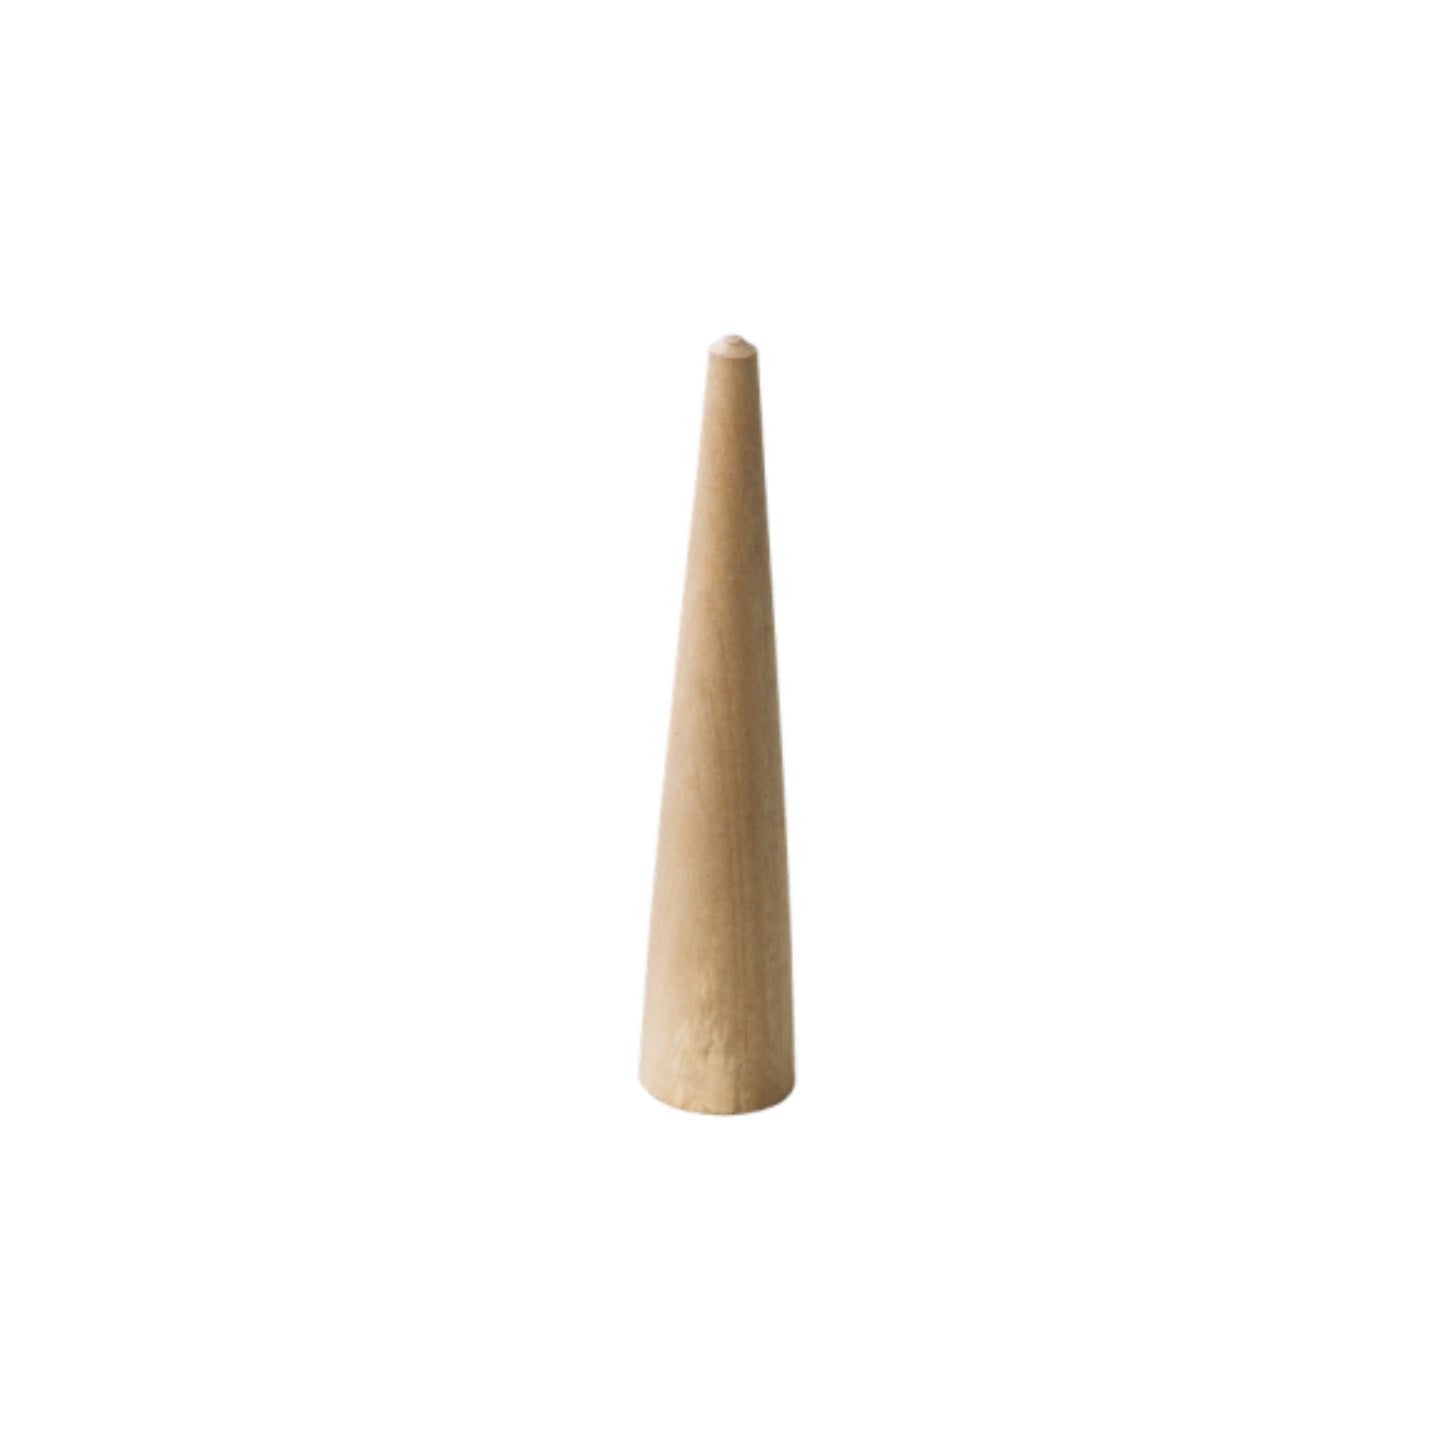 Shellac Wood Holder - Tapered Stick